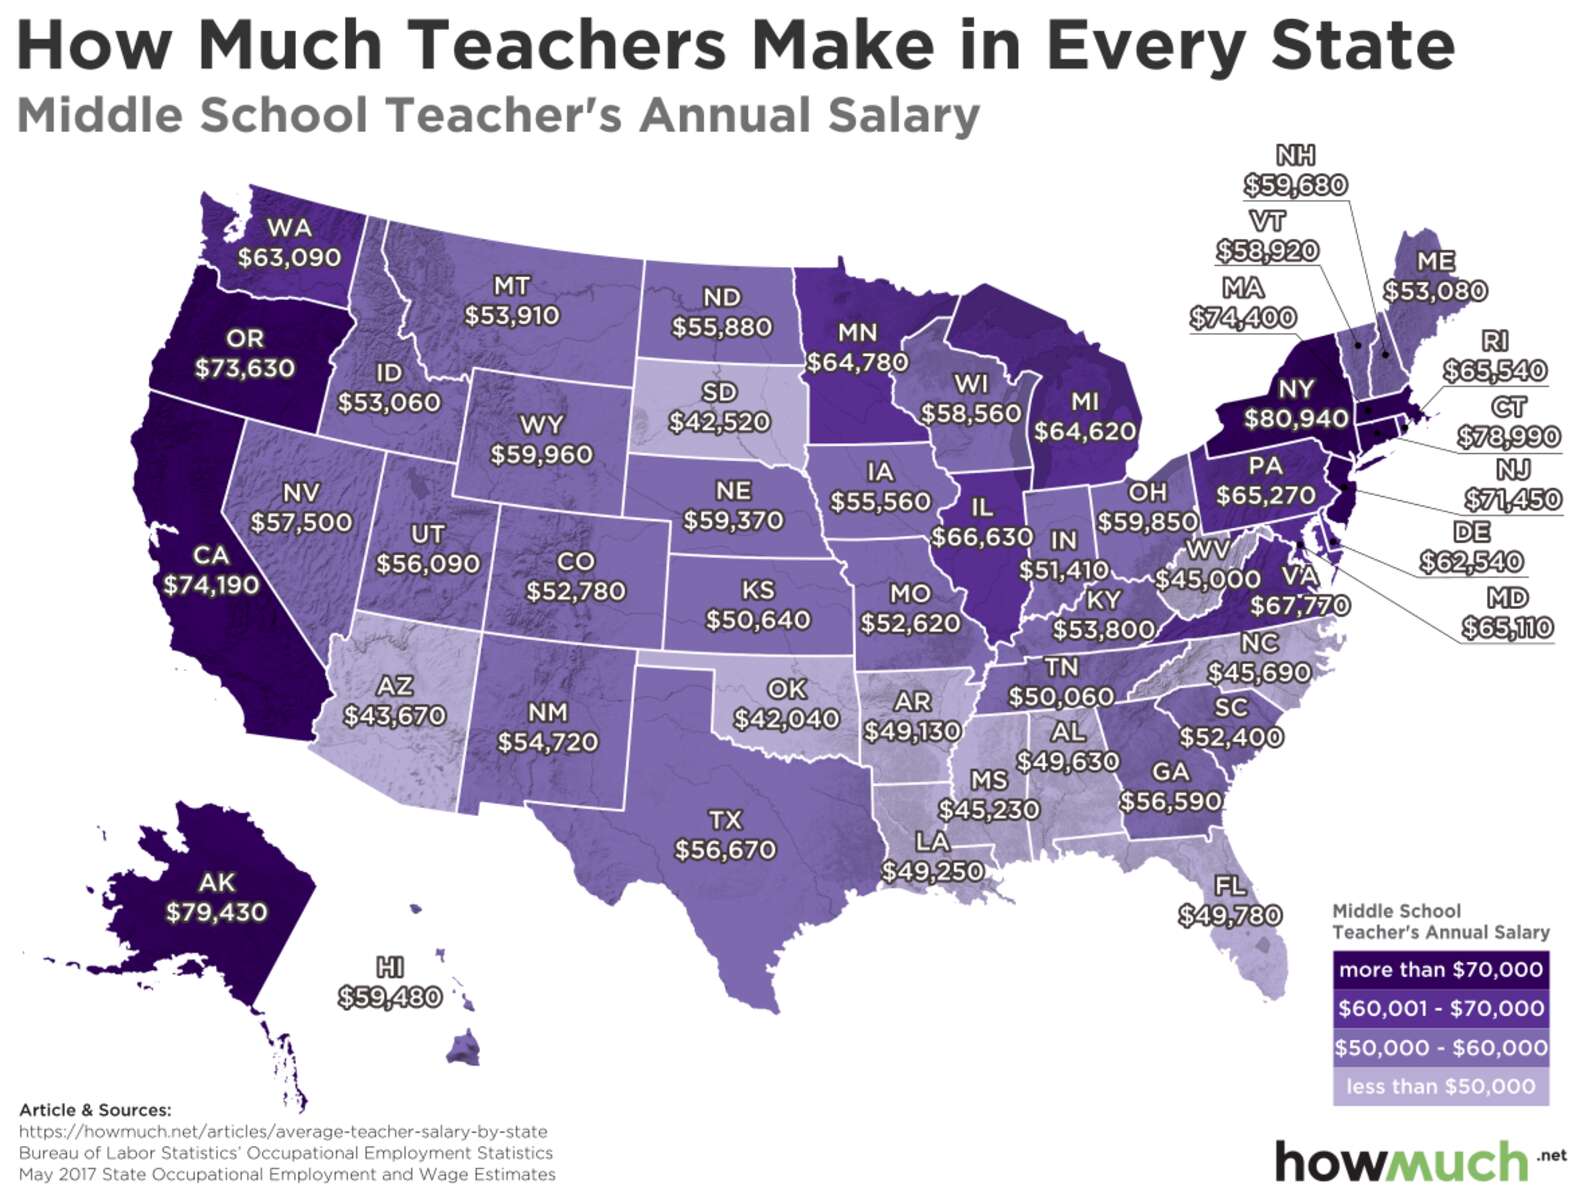 special education teacher with master's salary in illinois